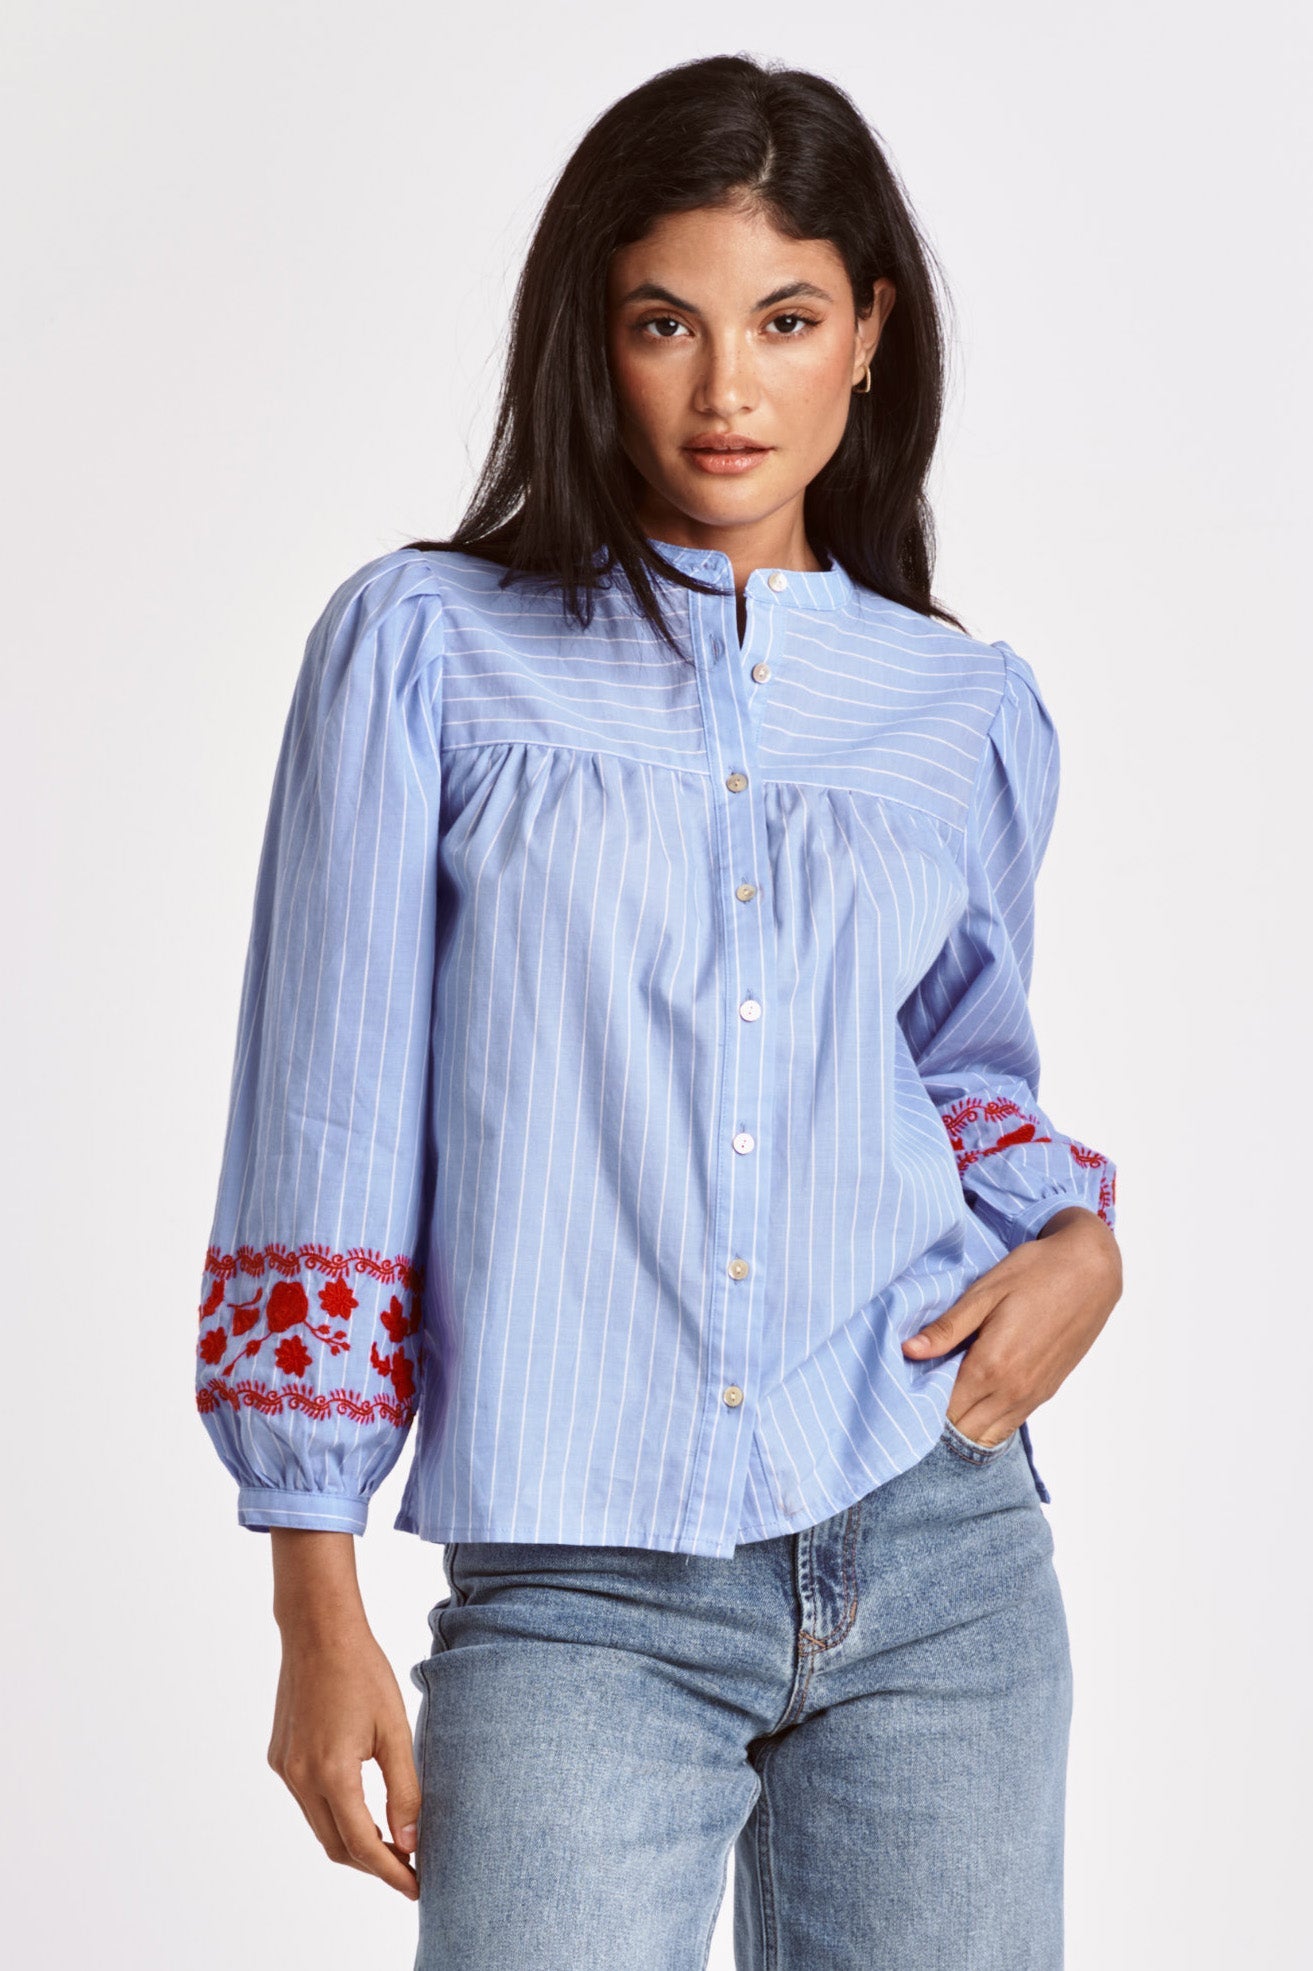 XANTHE EMBROIDERY DETAIL SHIRT RED PIN